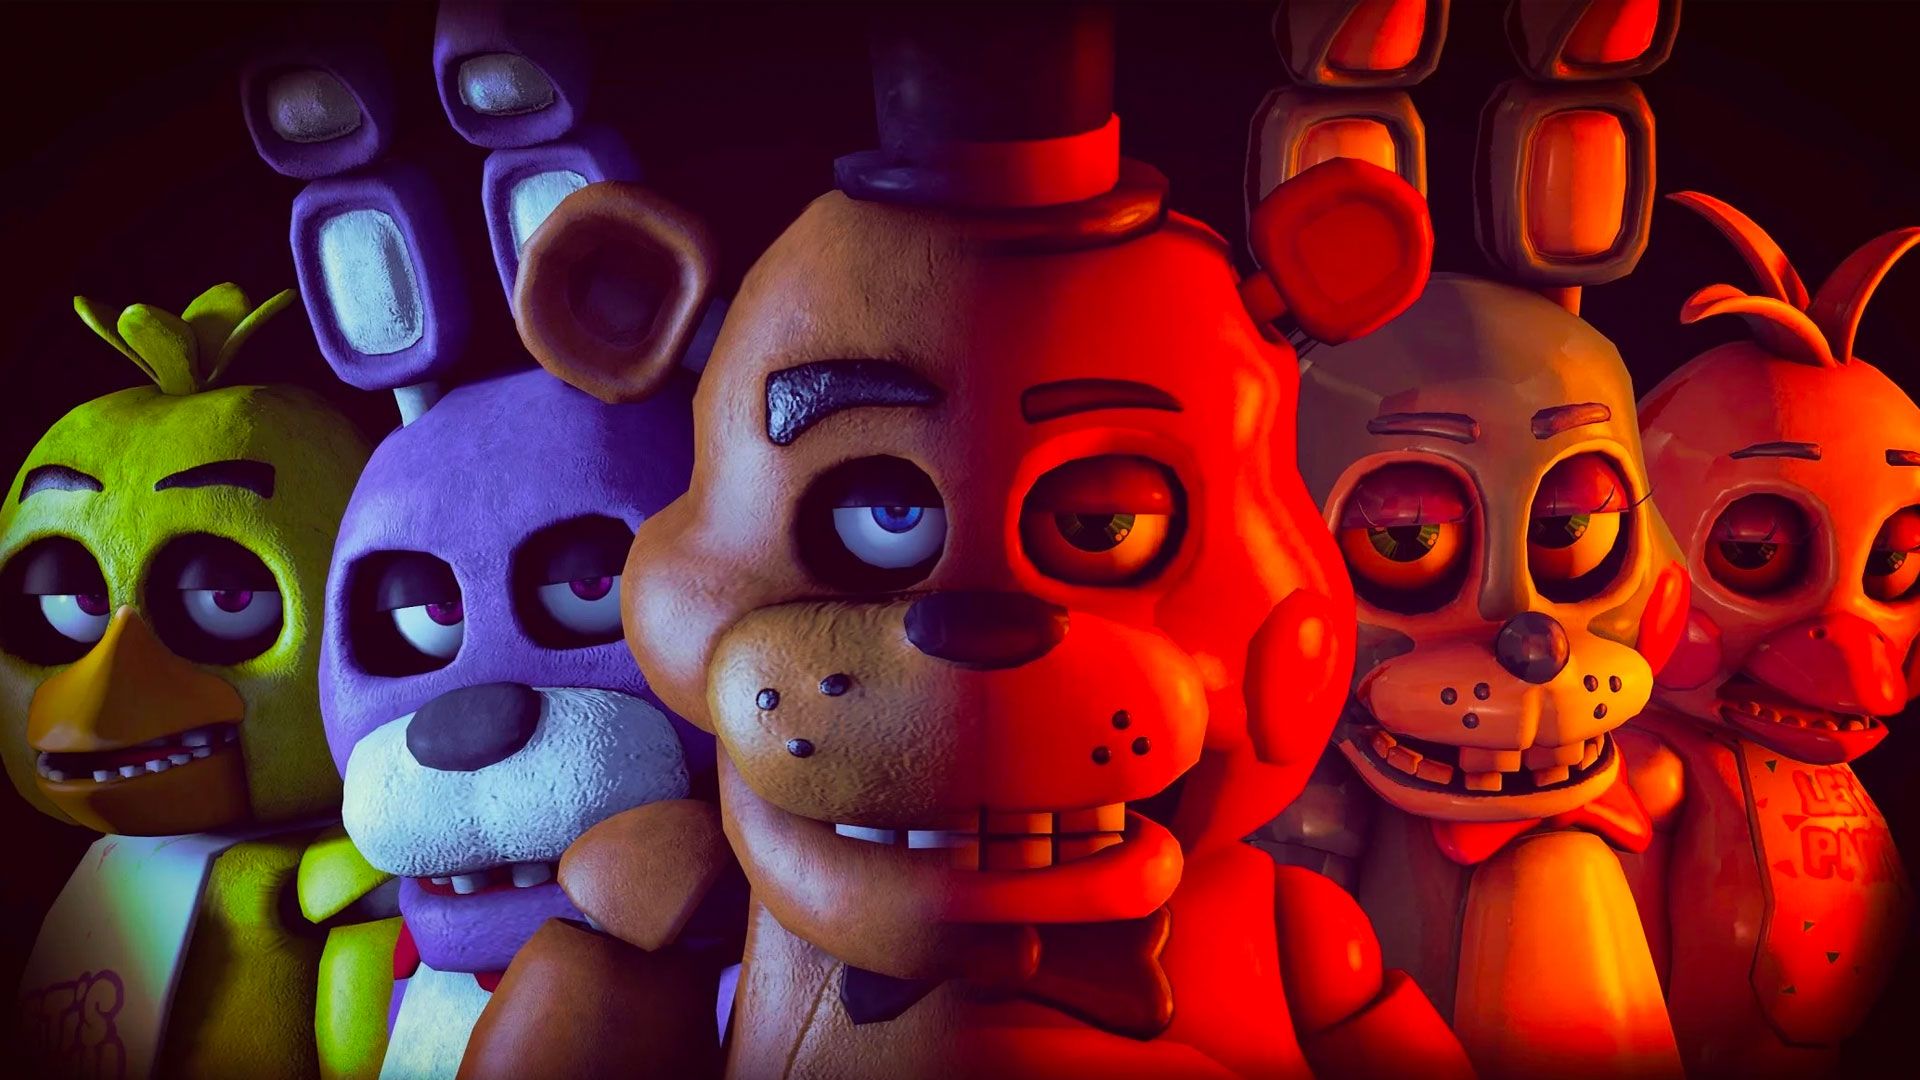 We haven't seen any trailers for Five Nights at Freddy's Security Breach yet, but this leak has reveal its characters